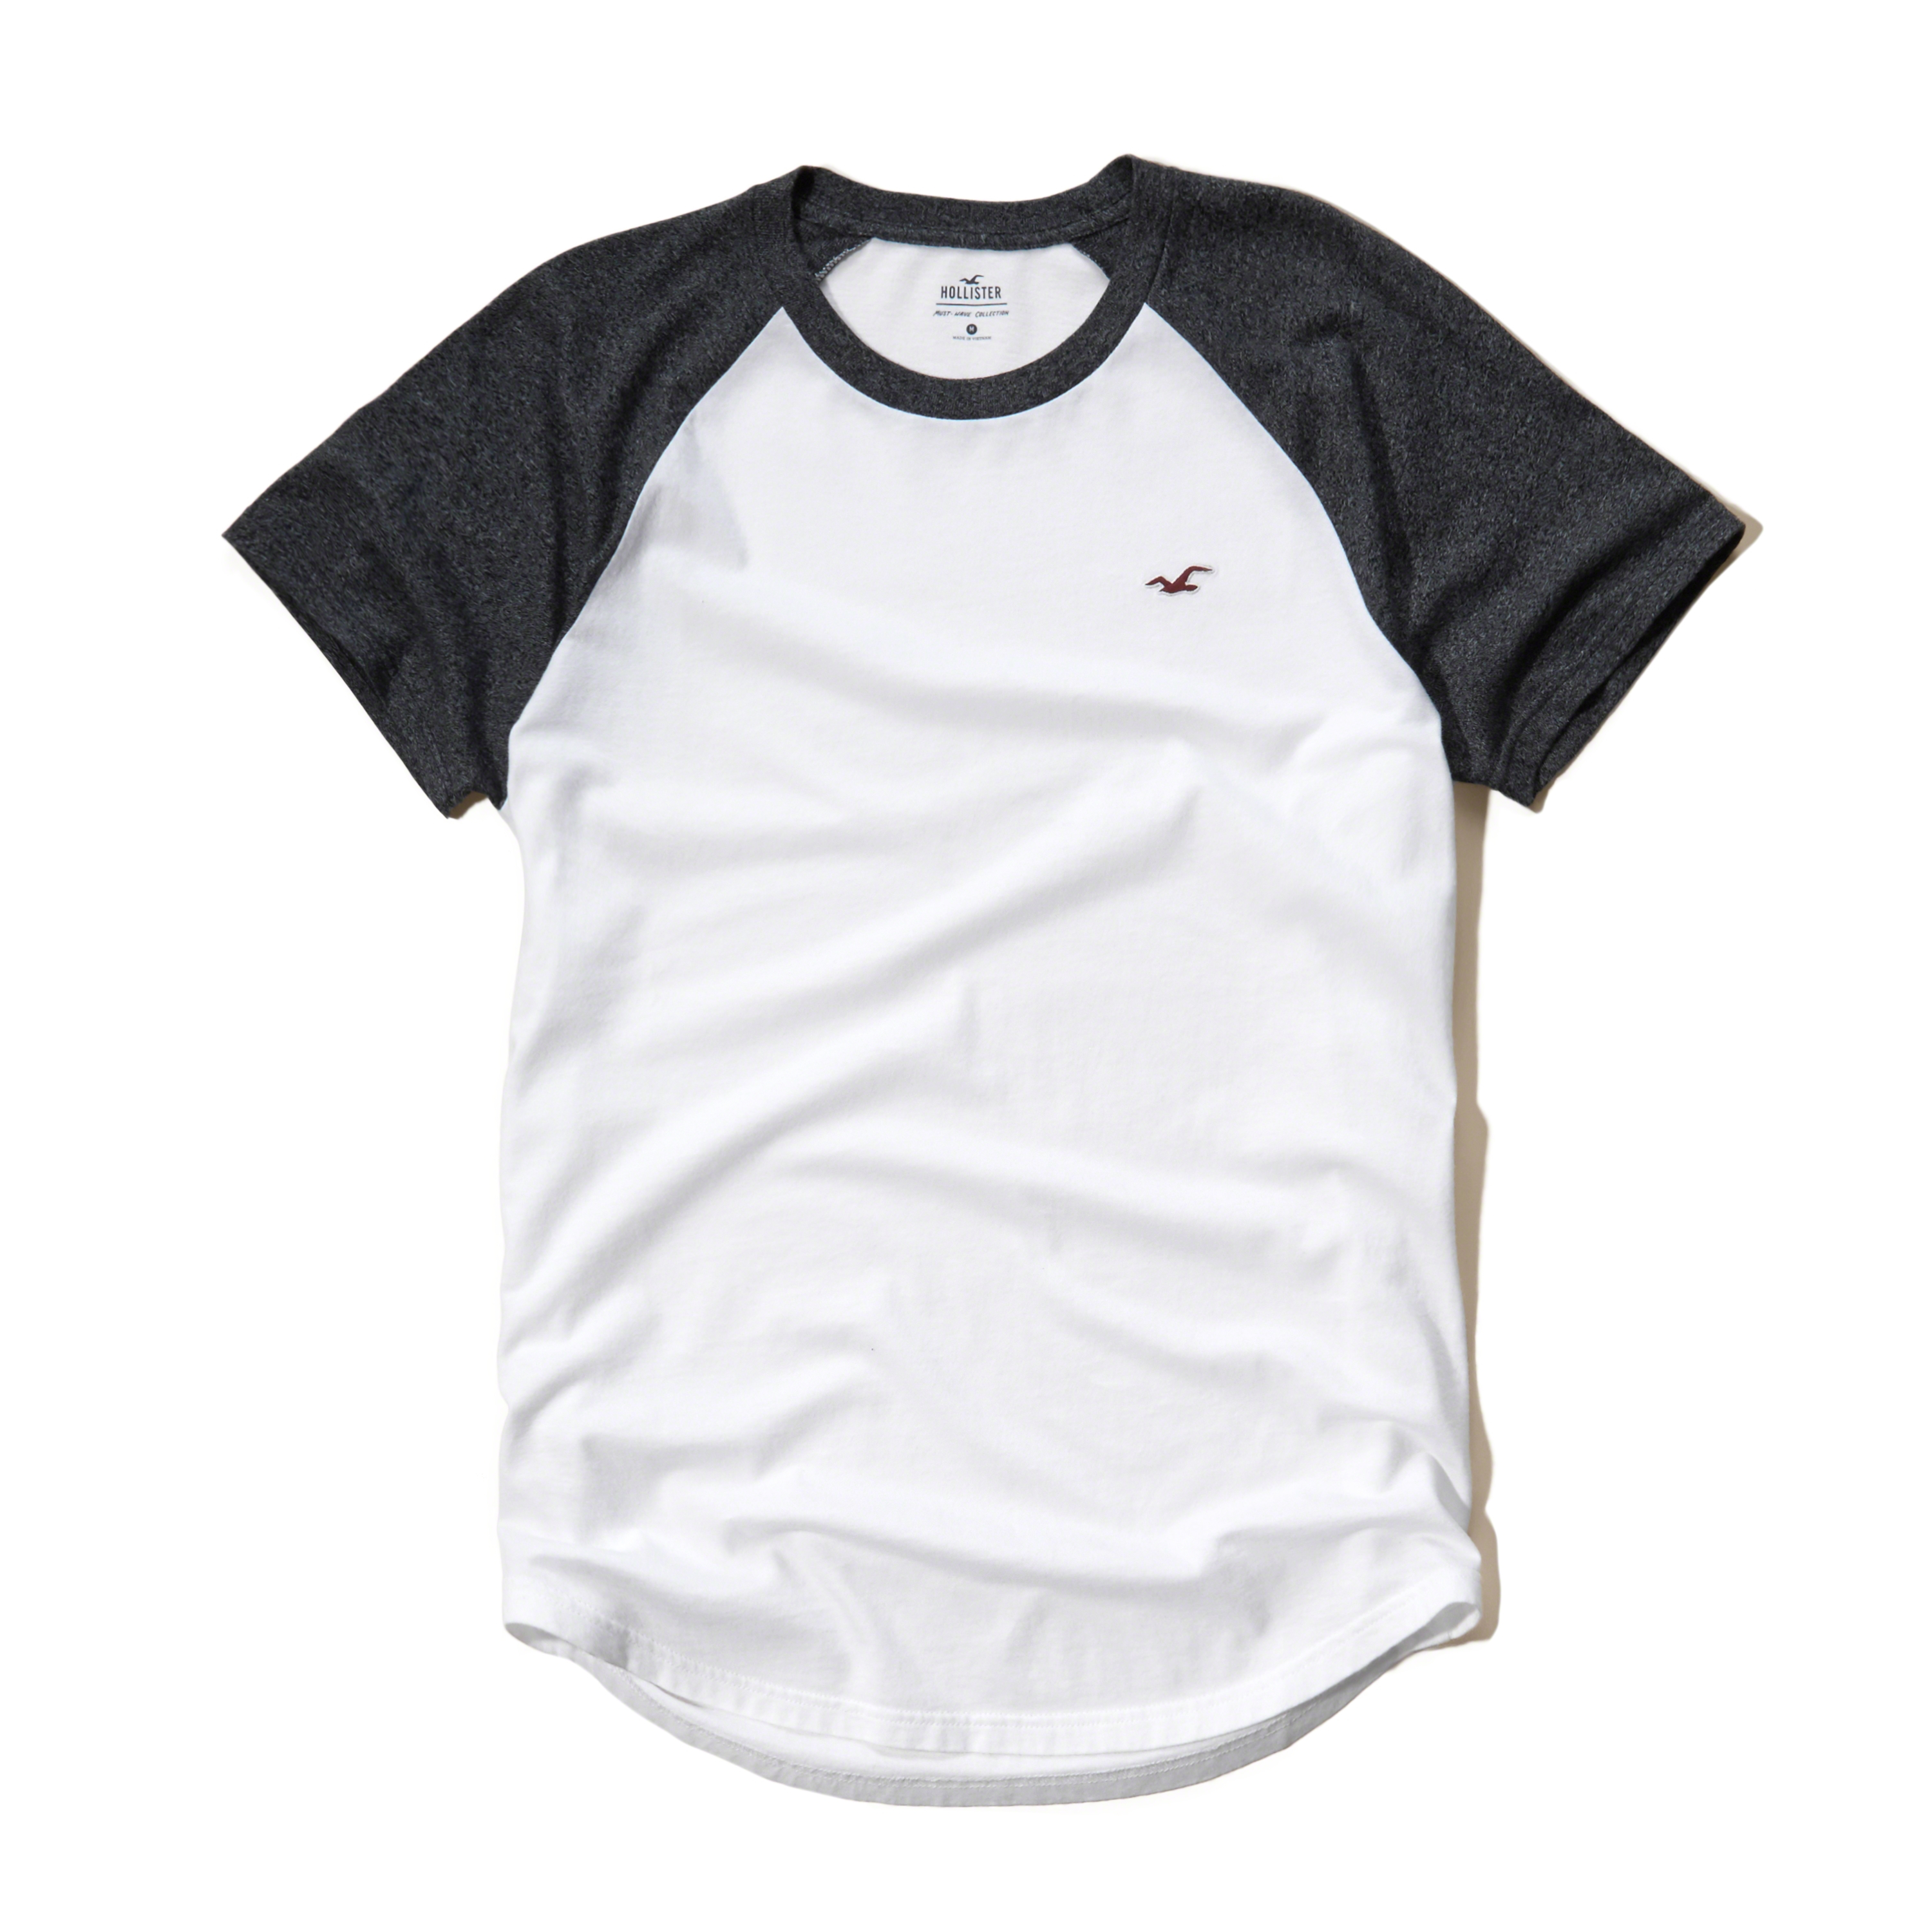 What are hollister white t shirt mens, Armani exchange t shirt size chart, north face usa shop online. 